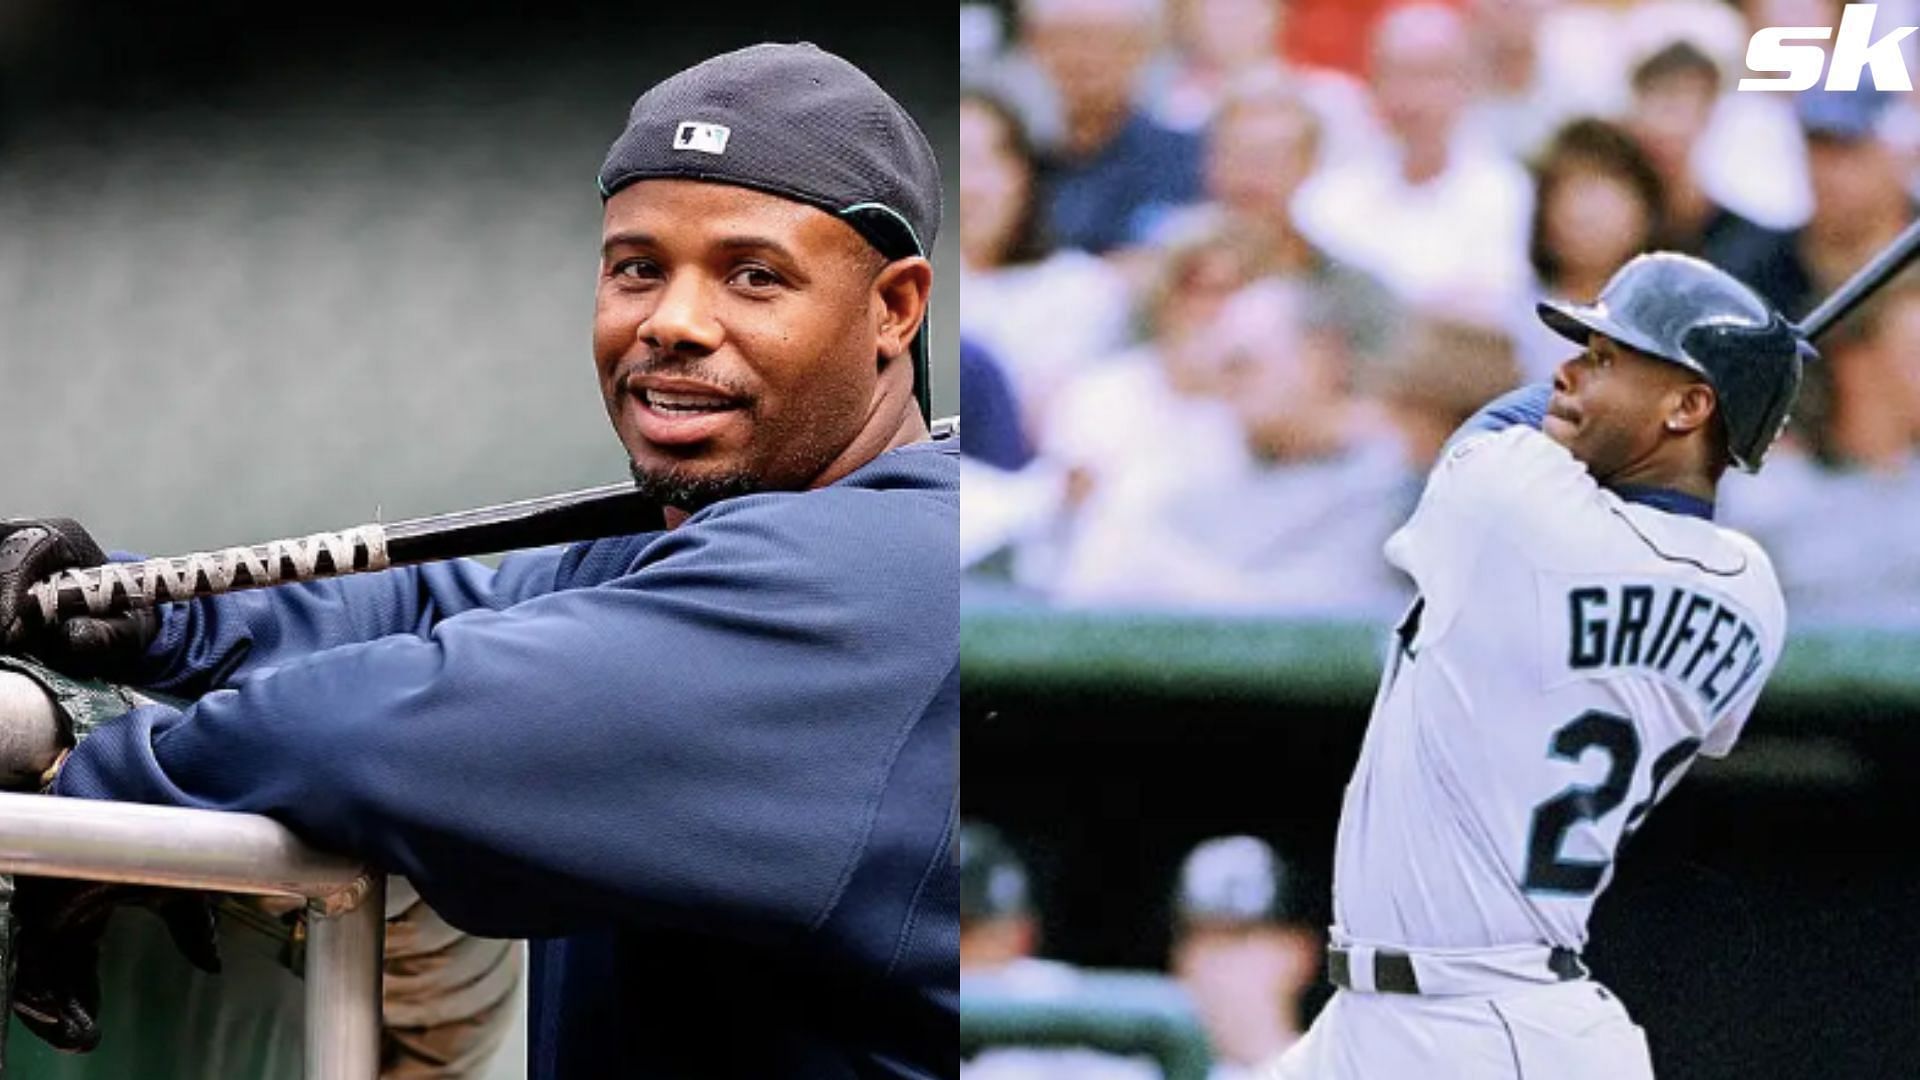 Twitter reacts to Ken Griffey Jr.'s new career as photographer at Cardinals  NFL game - Channeling his inner Randy Johnson